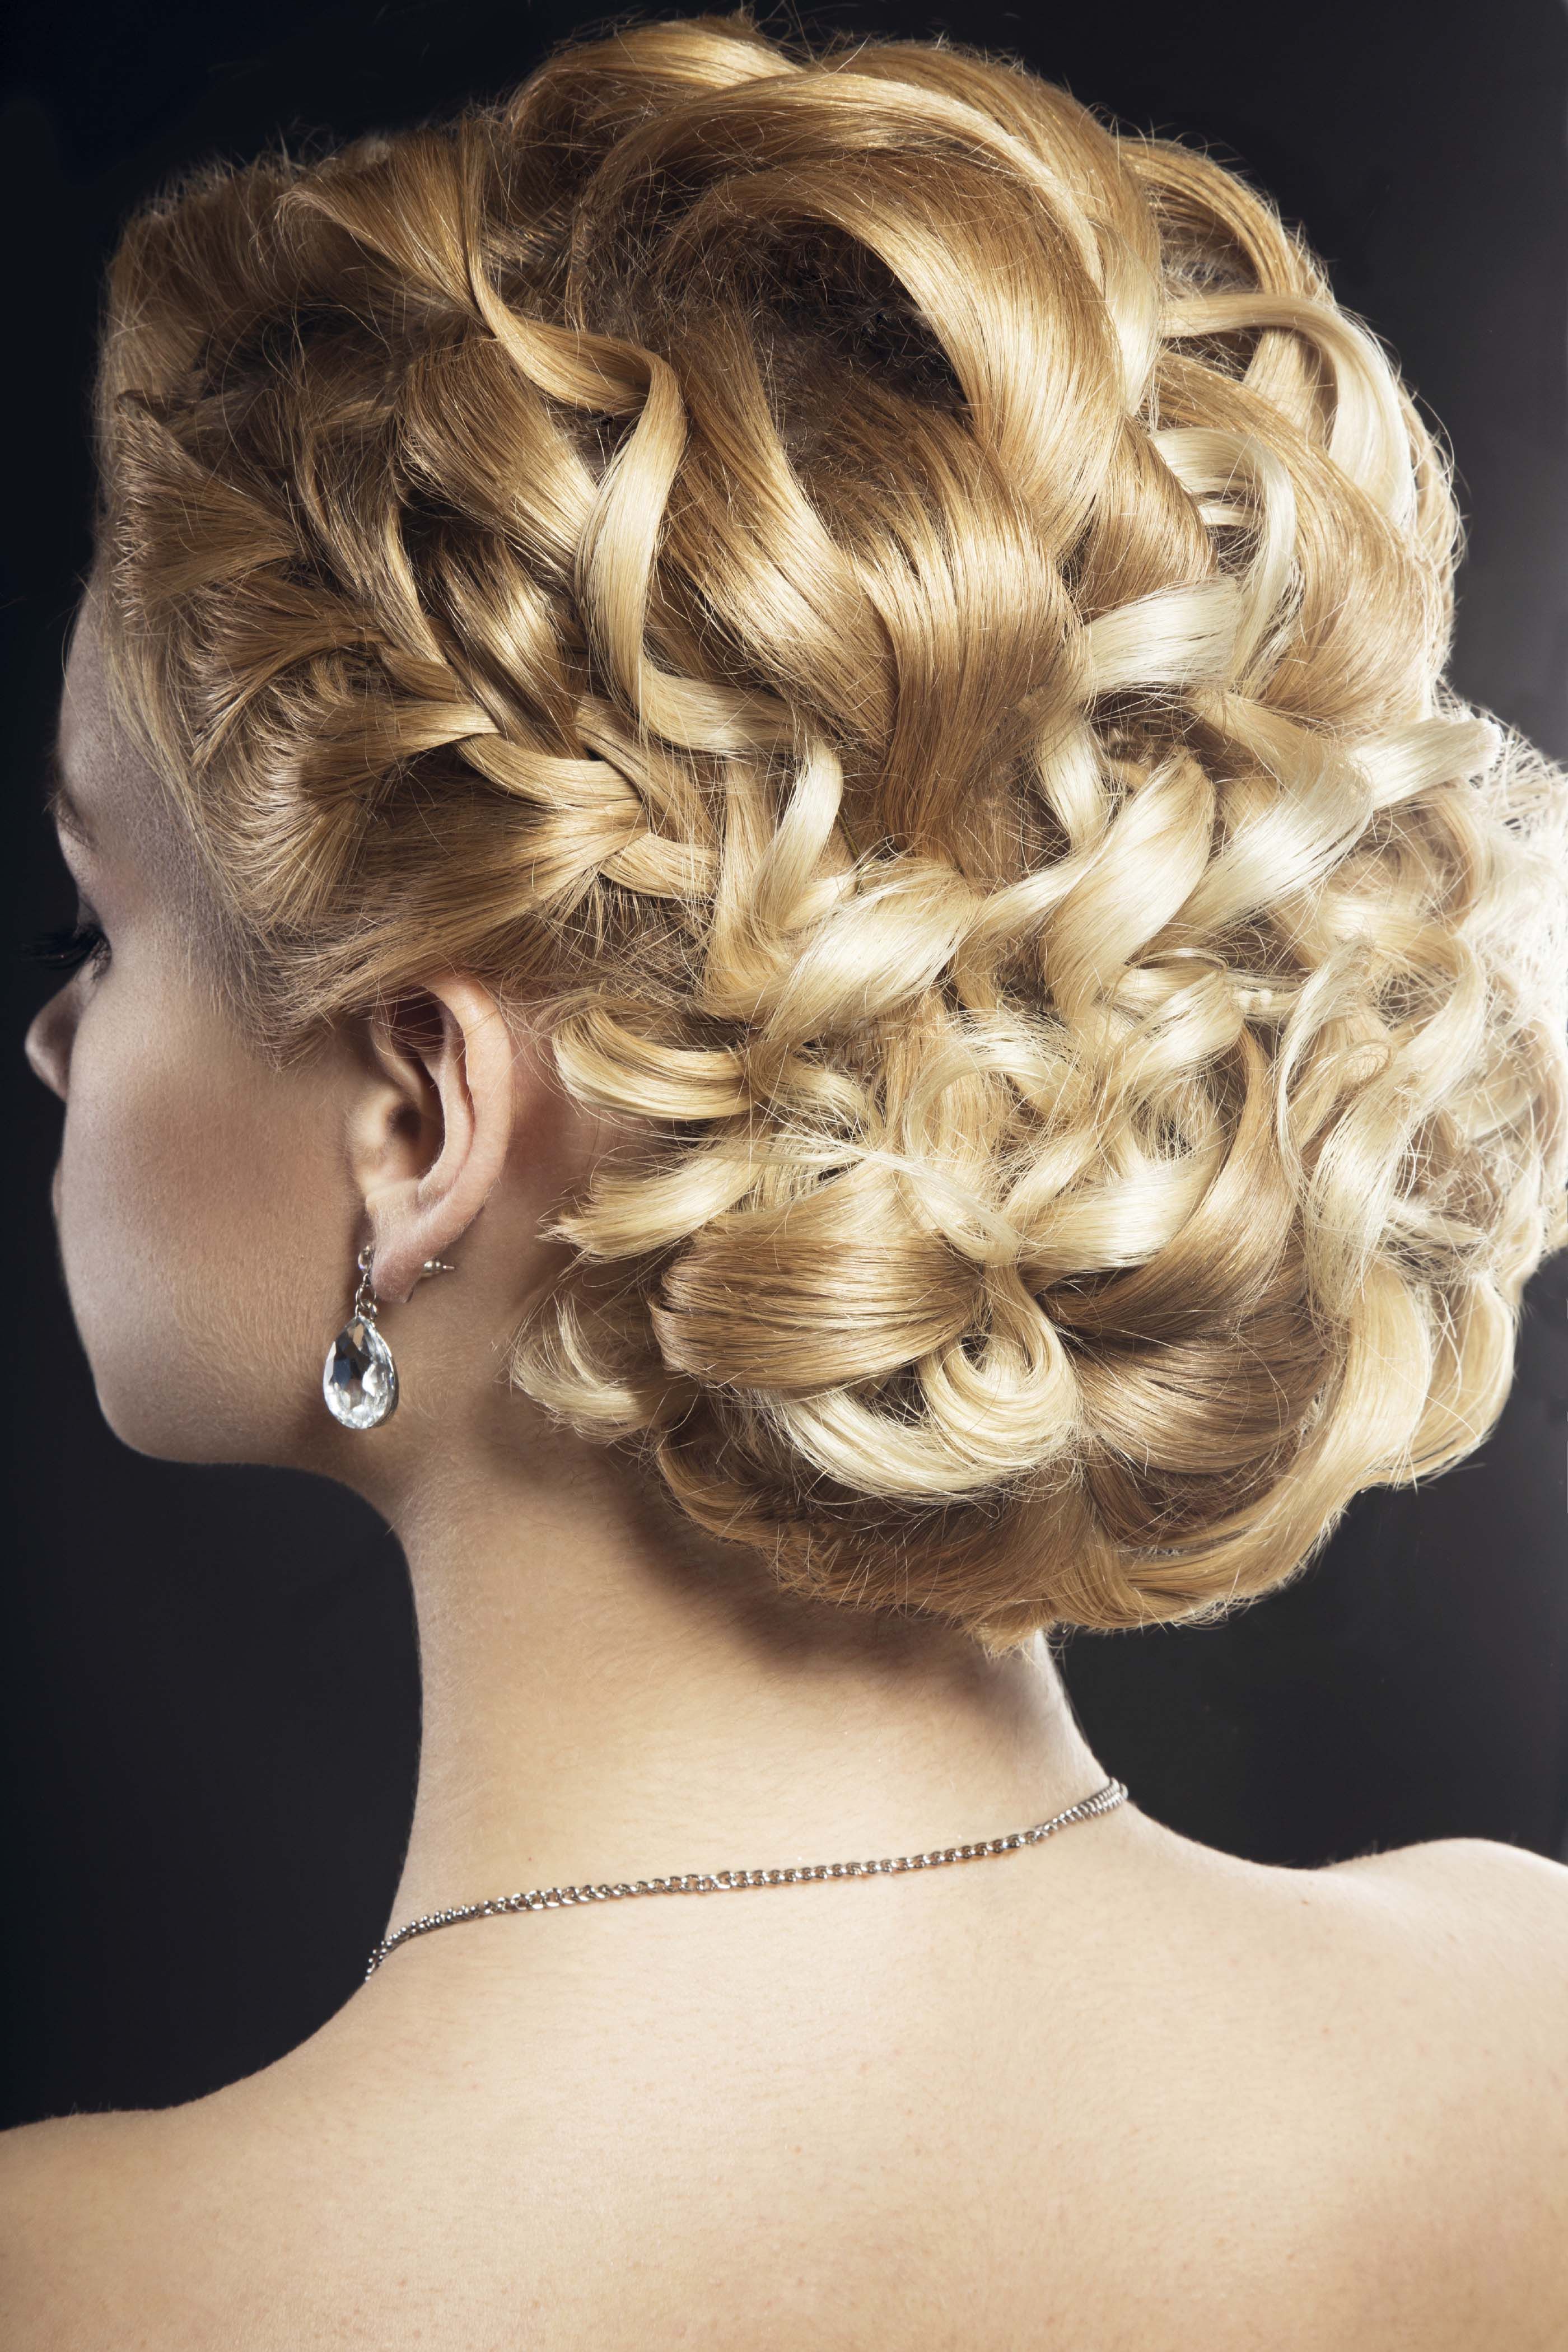 Wedding Updos For Curly Hair: 9 Styles To Inspire Your Wedding Day Look |  All Things Hair Us Within Updo For Long Curly Hair (Photo 12 of 25)